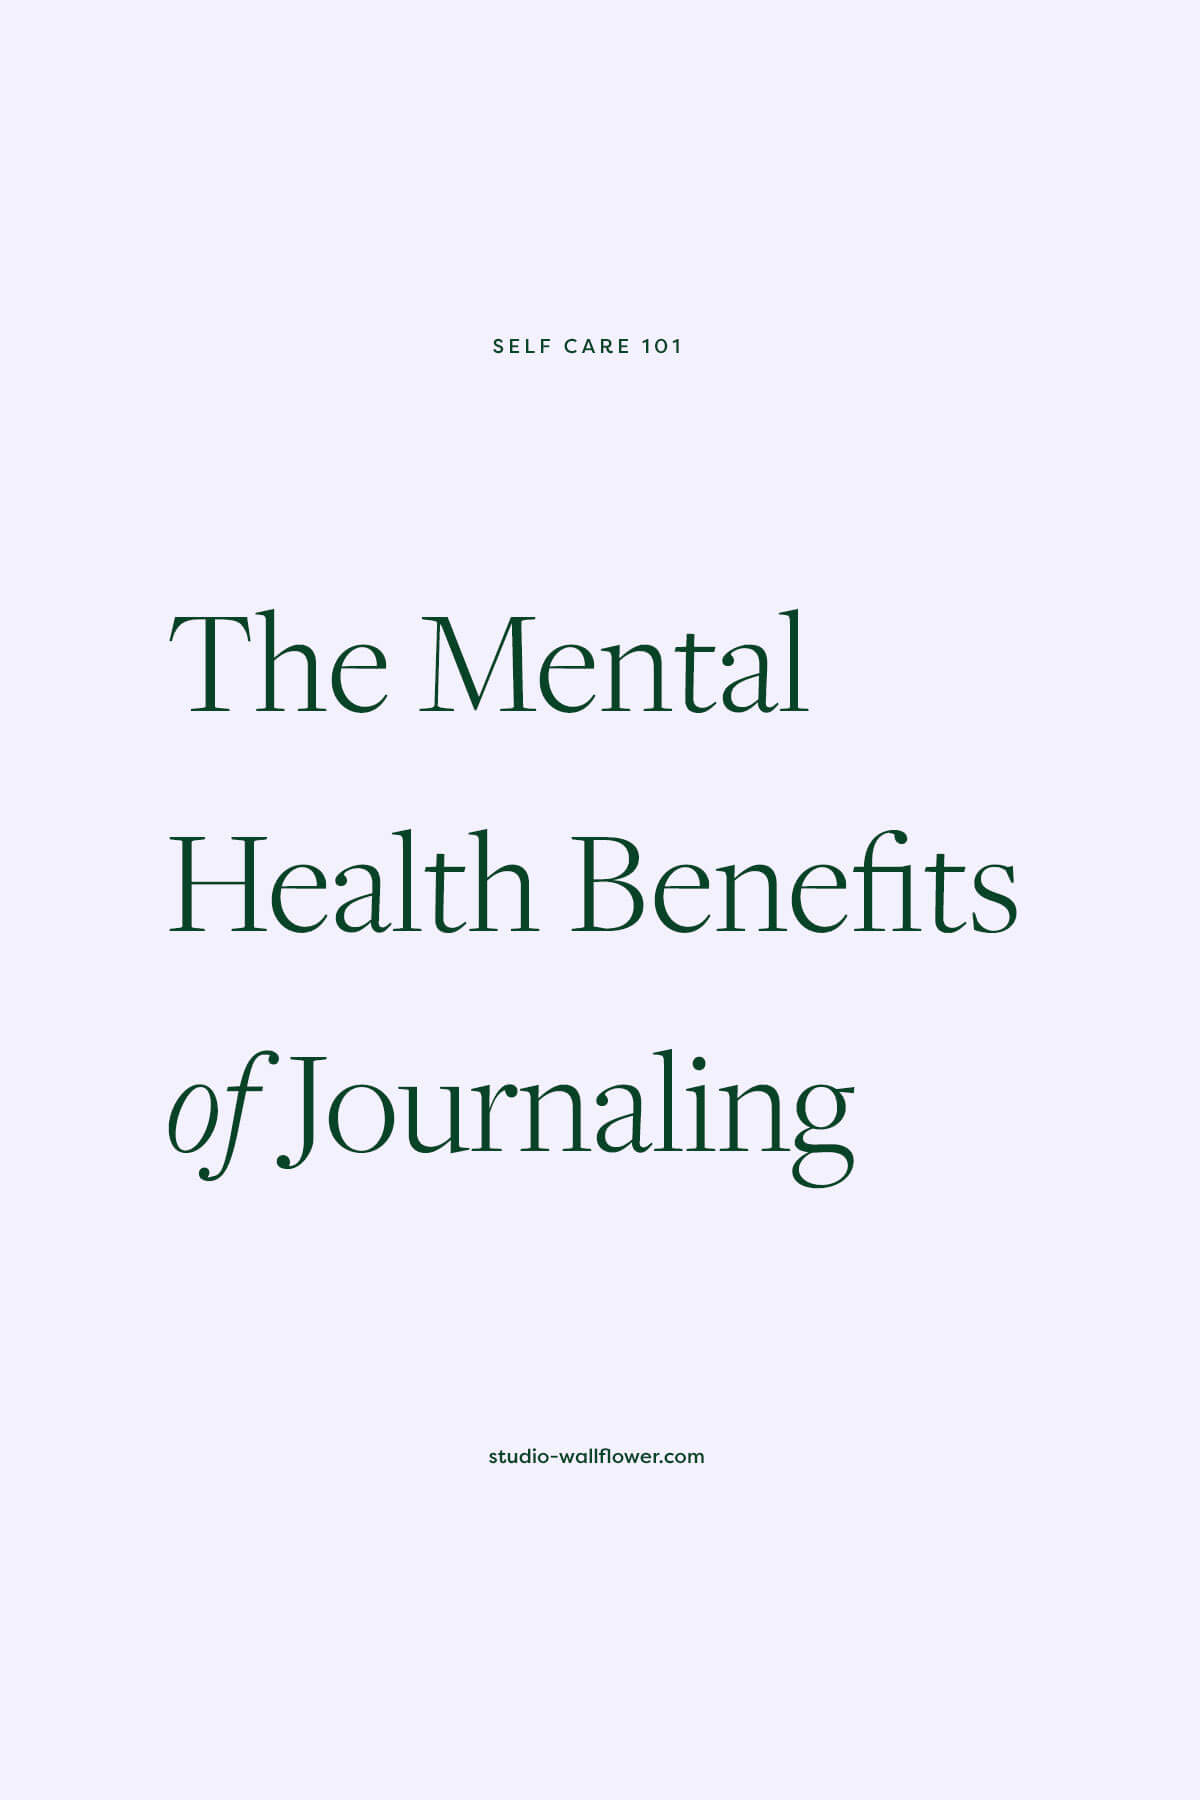 mental health benefits of journaling to reduce stress, alleviate anxiety, and cope with depression